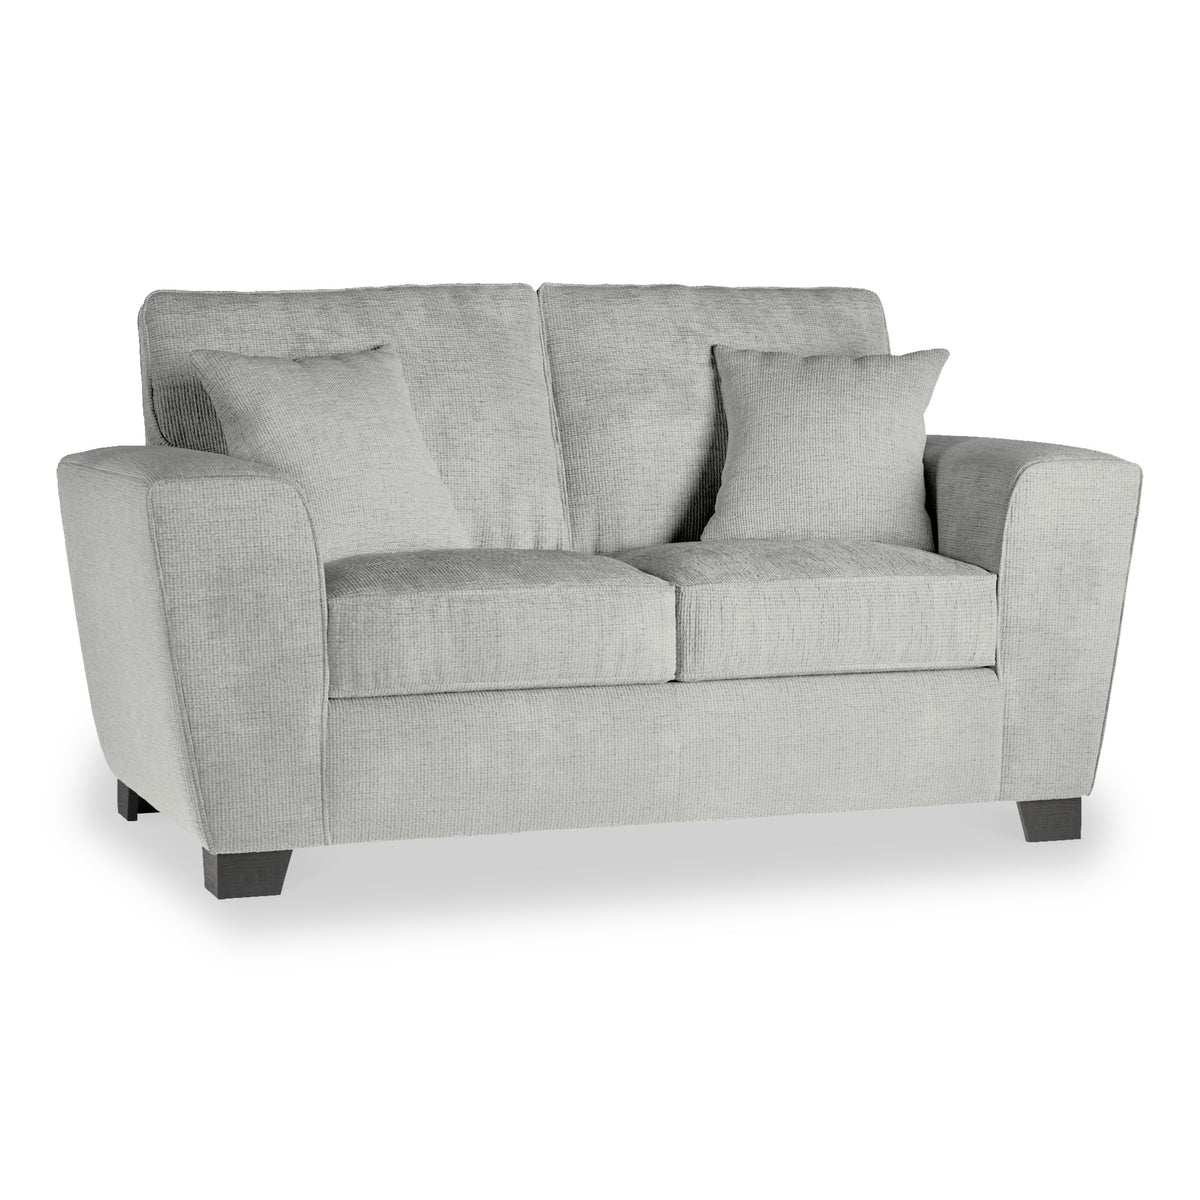 Chester Silver Hopsack 2 Seater Sofa from Roseland Furniture